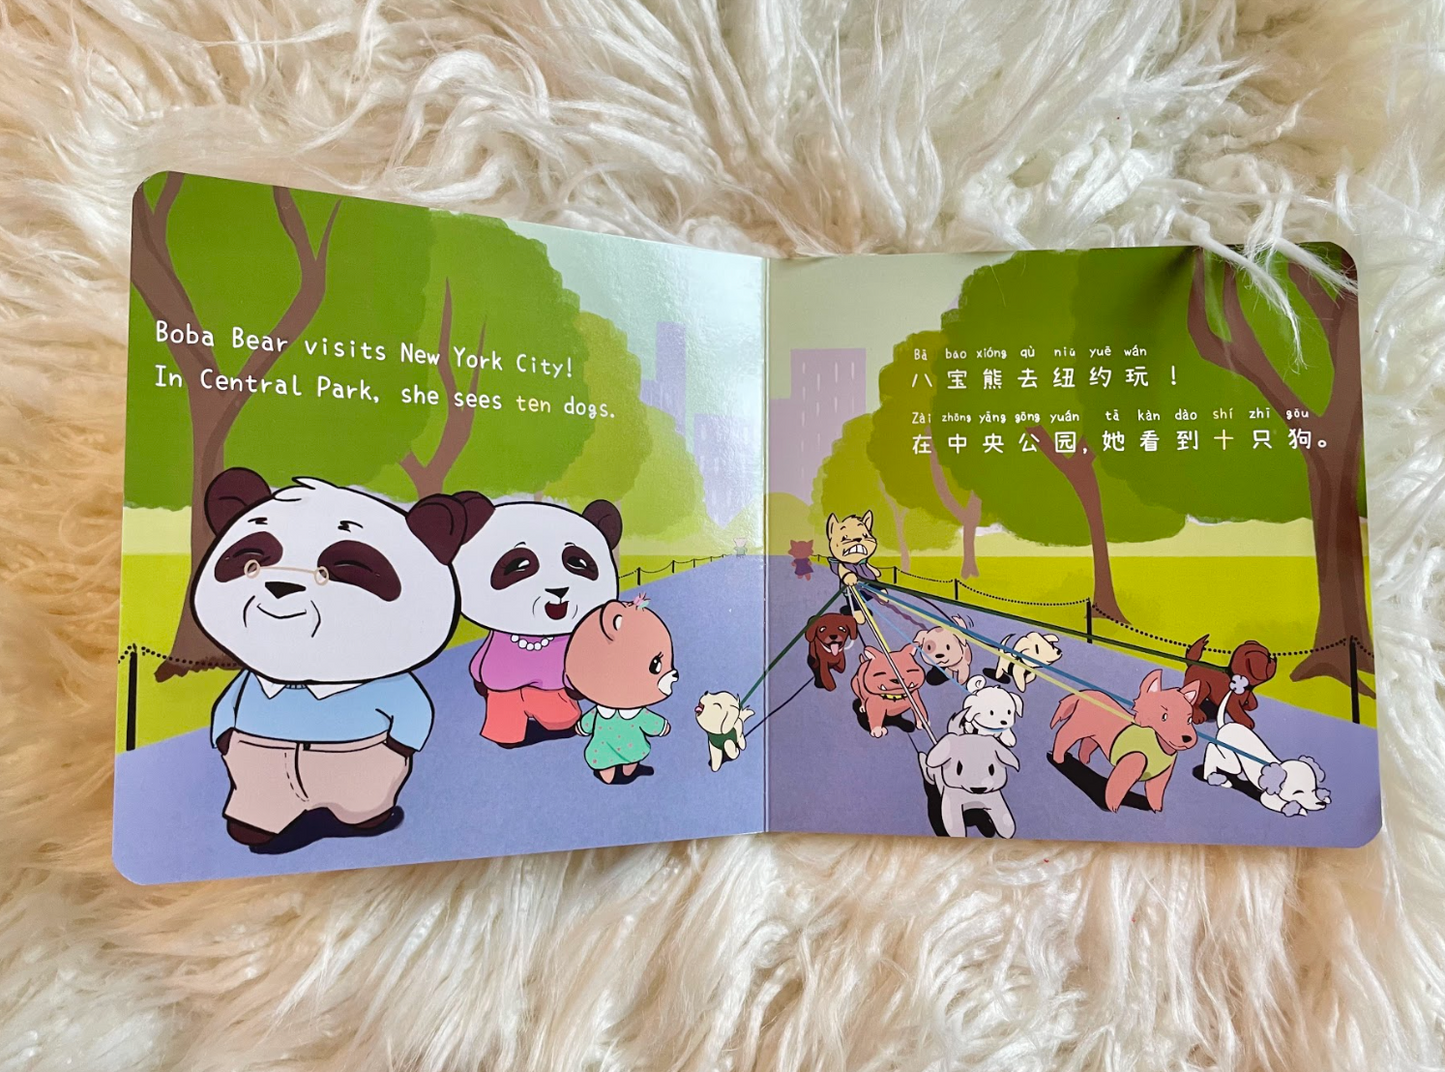 Donate Boba Bear books to a local library